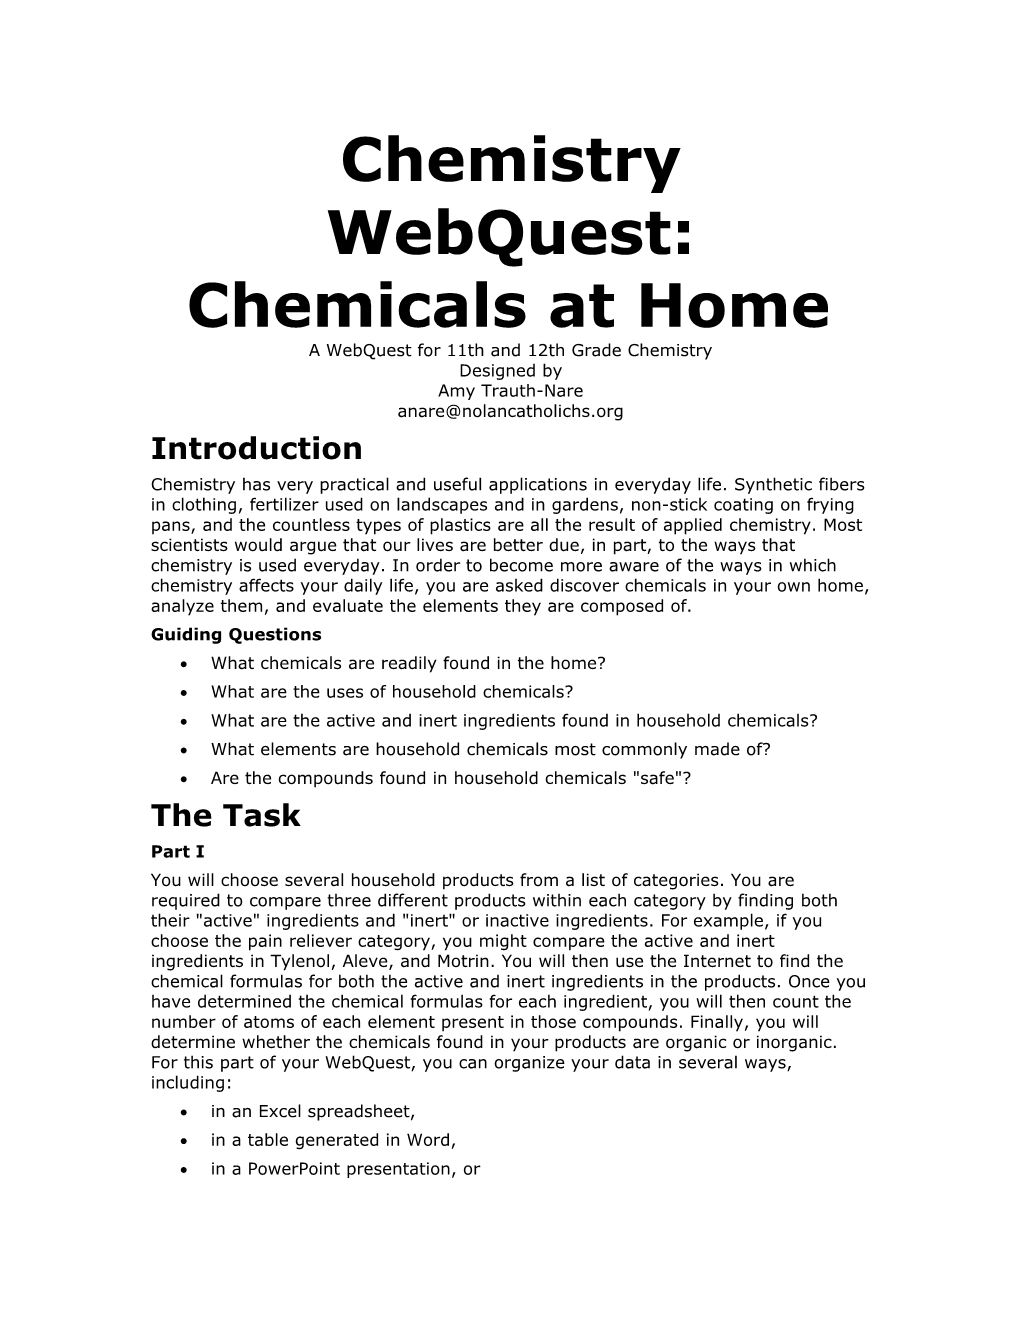 Chemistry Webquest: Chemicals at Home